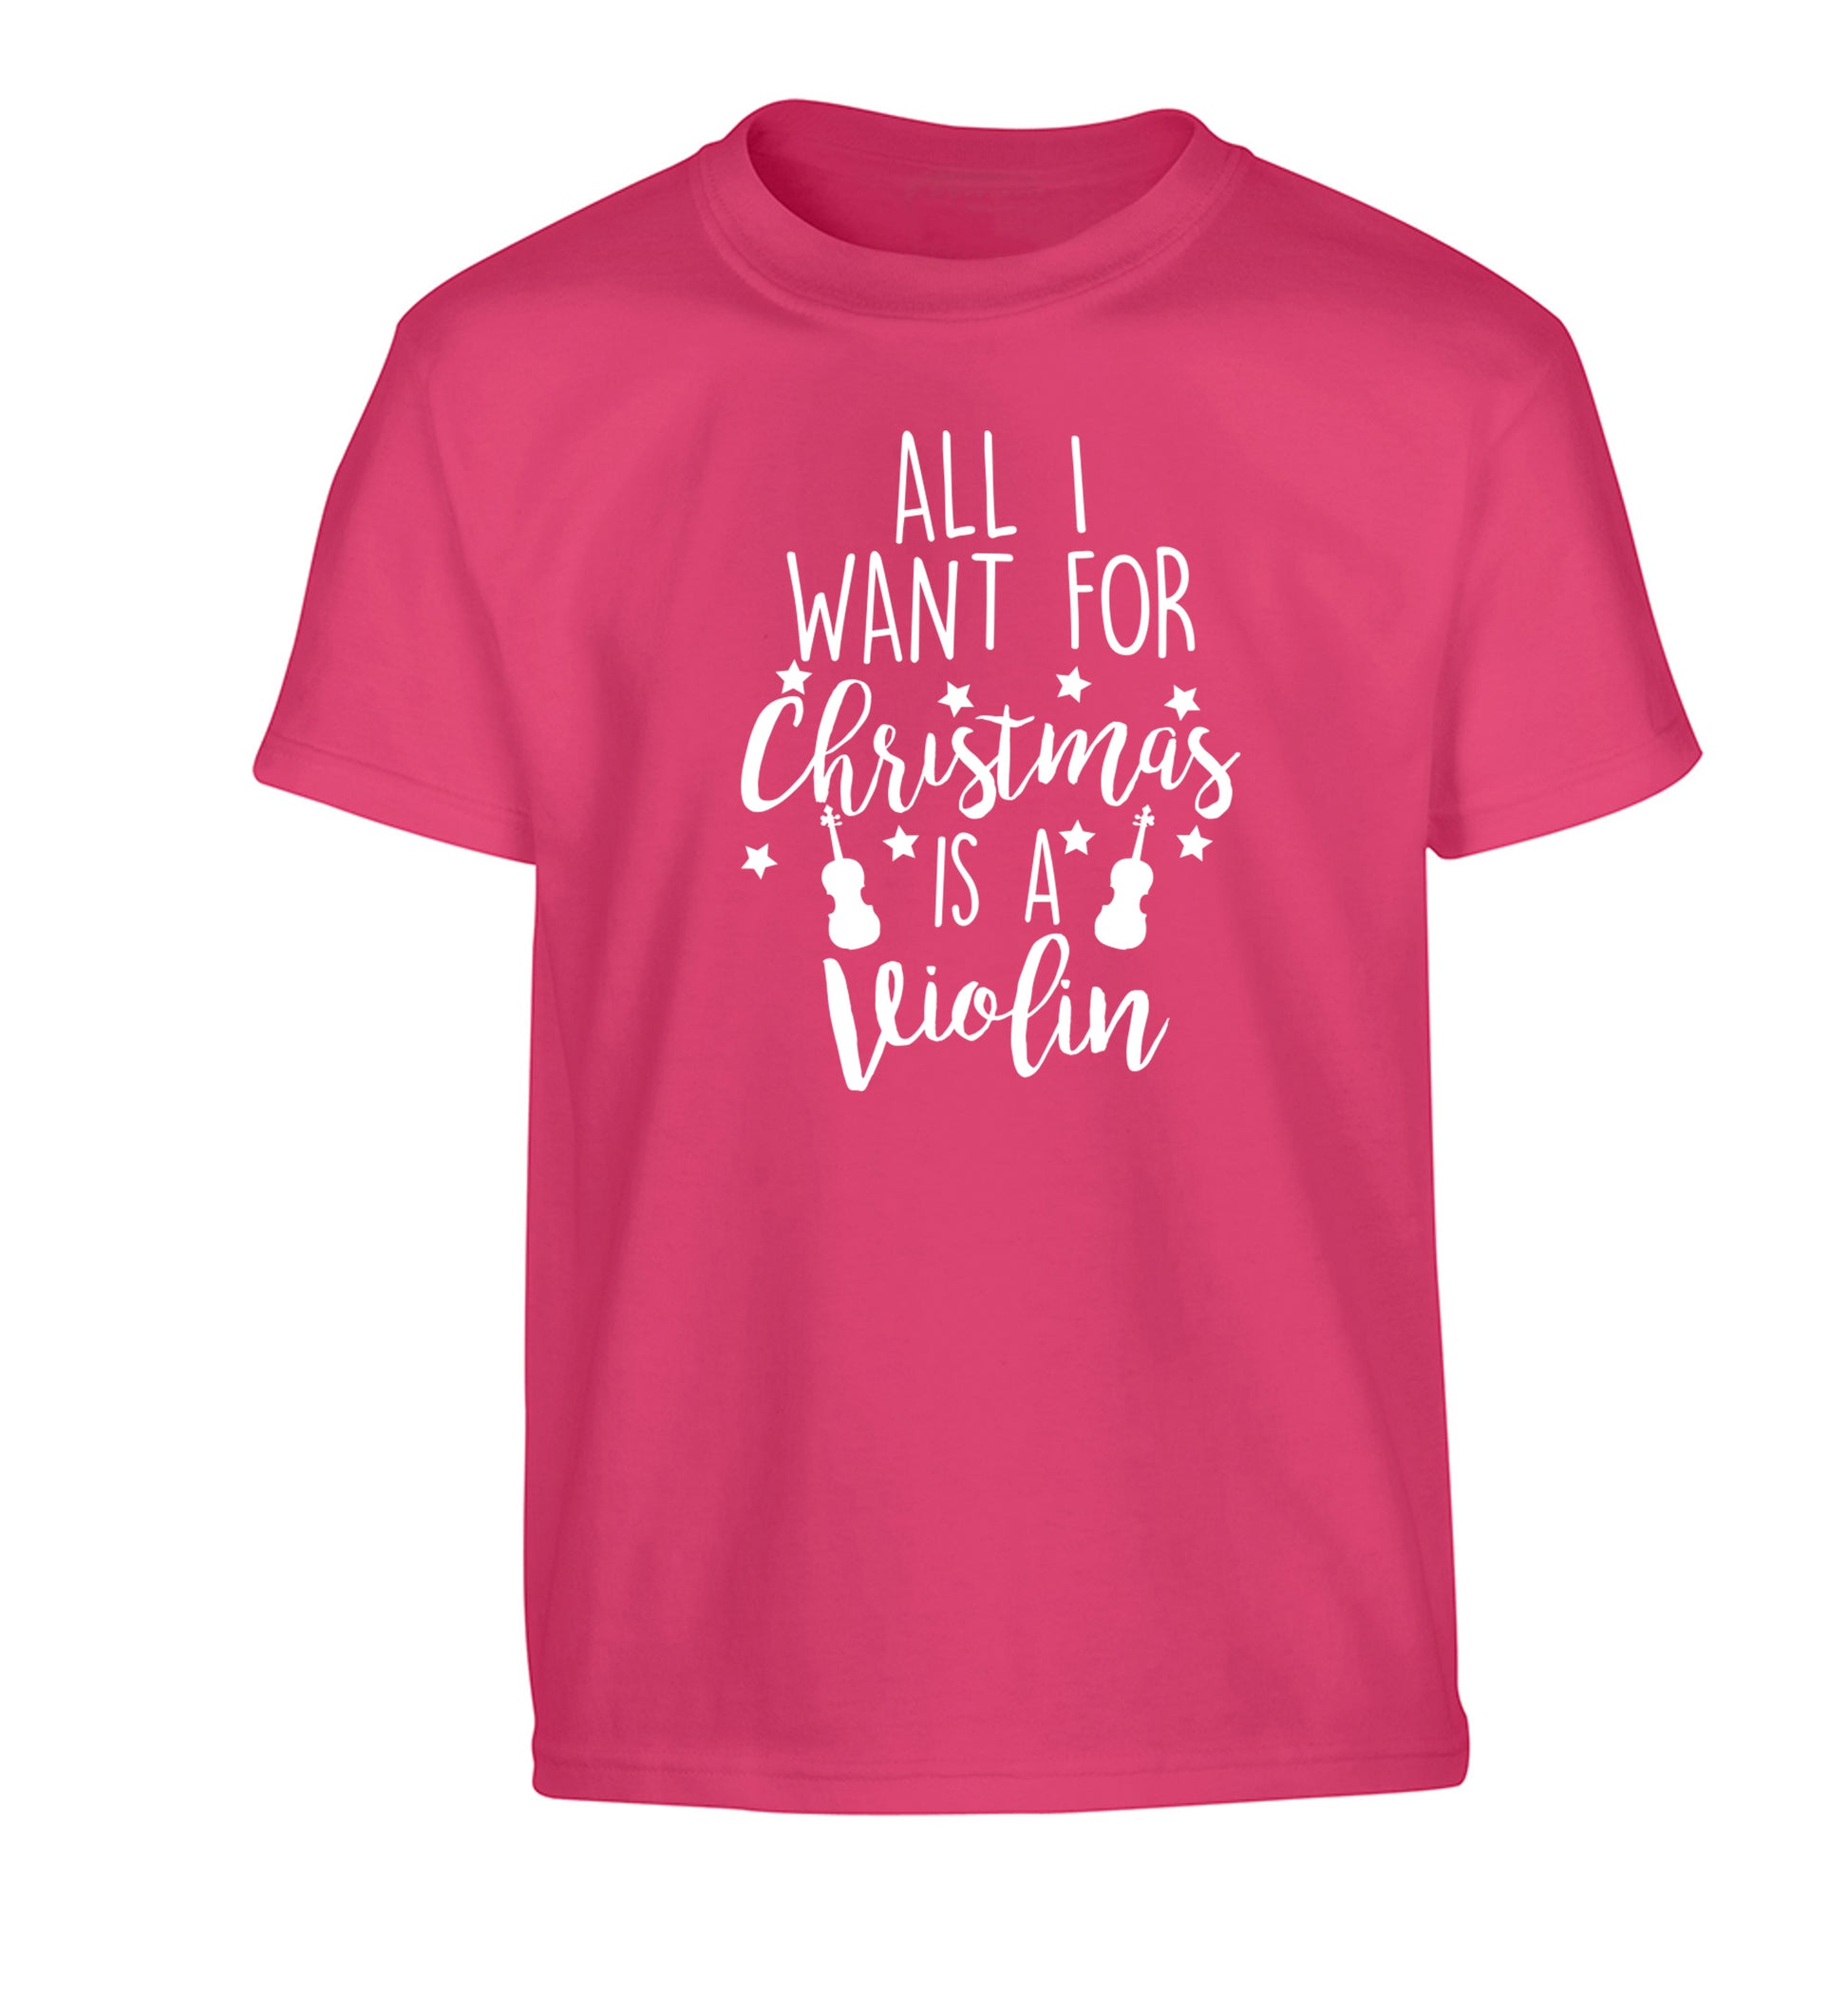 All I Want For Christmas is a Violin Children's pink Tshirt 12-13 Years